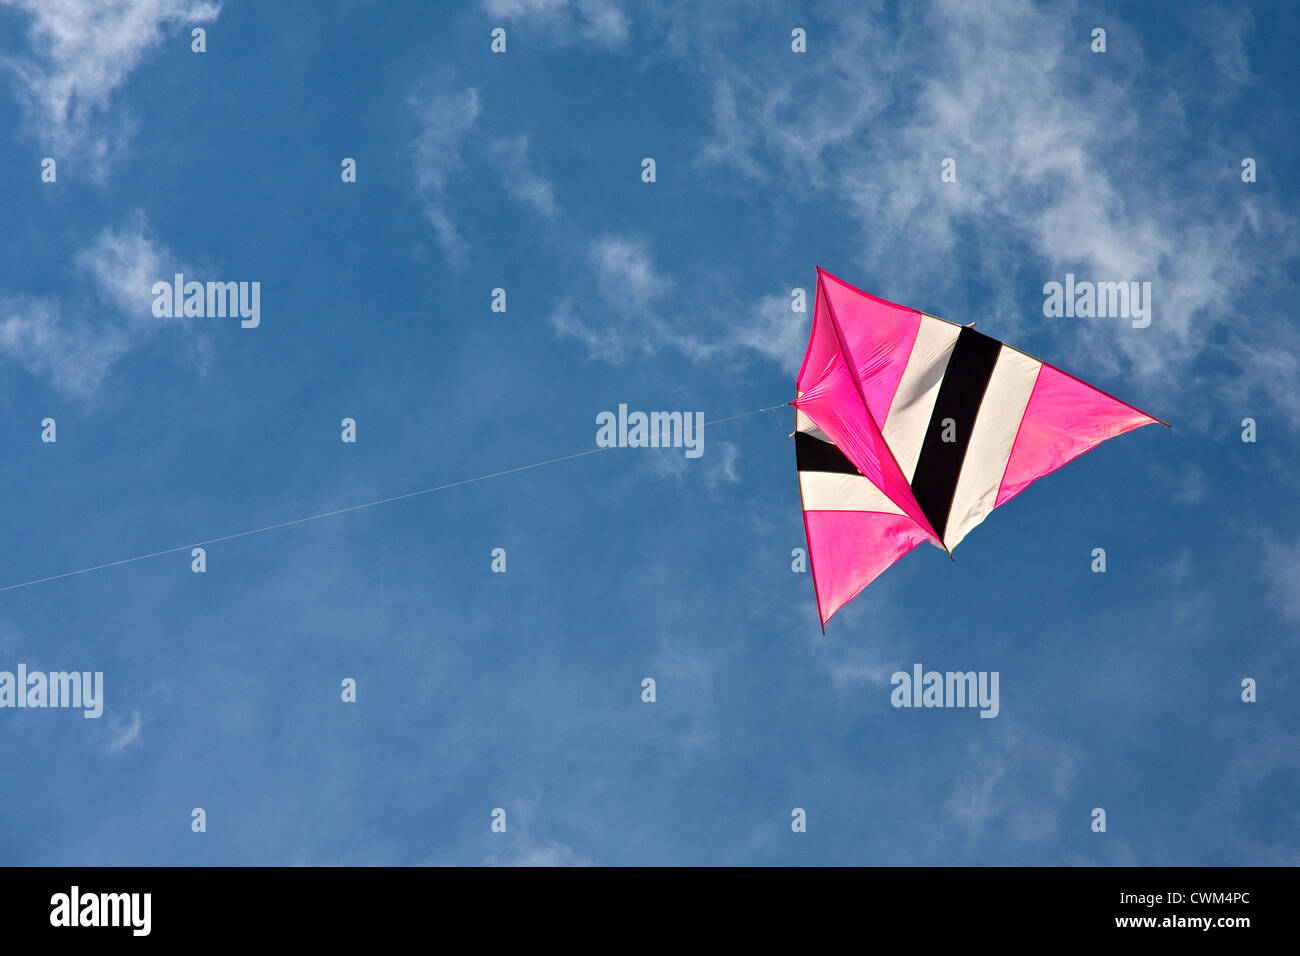 Colourful kite flying against blue cloudy sky Stock Photo